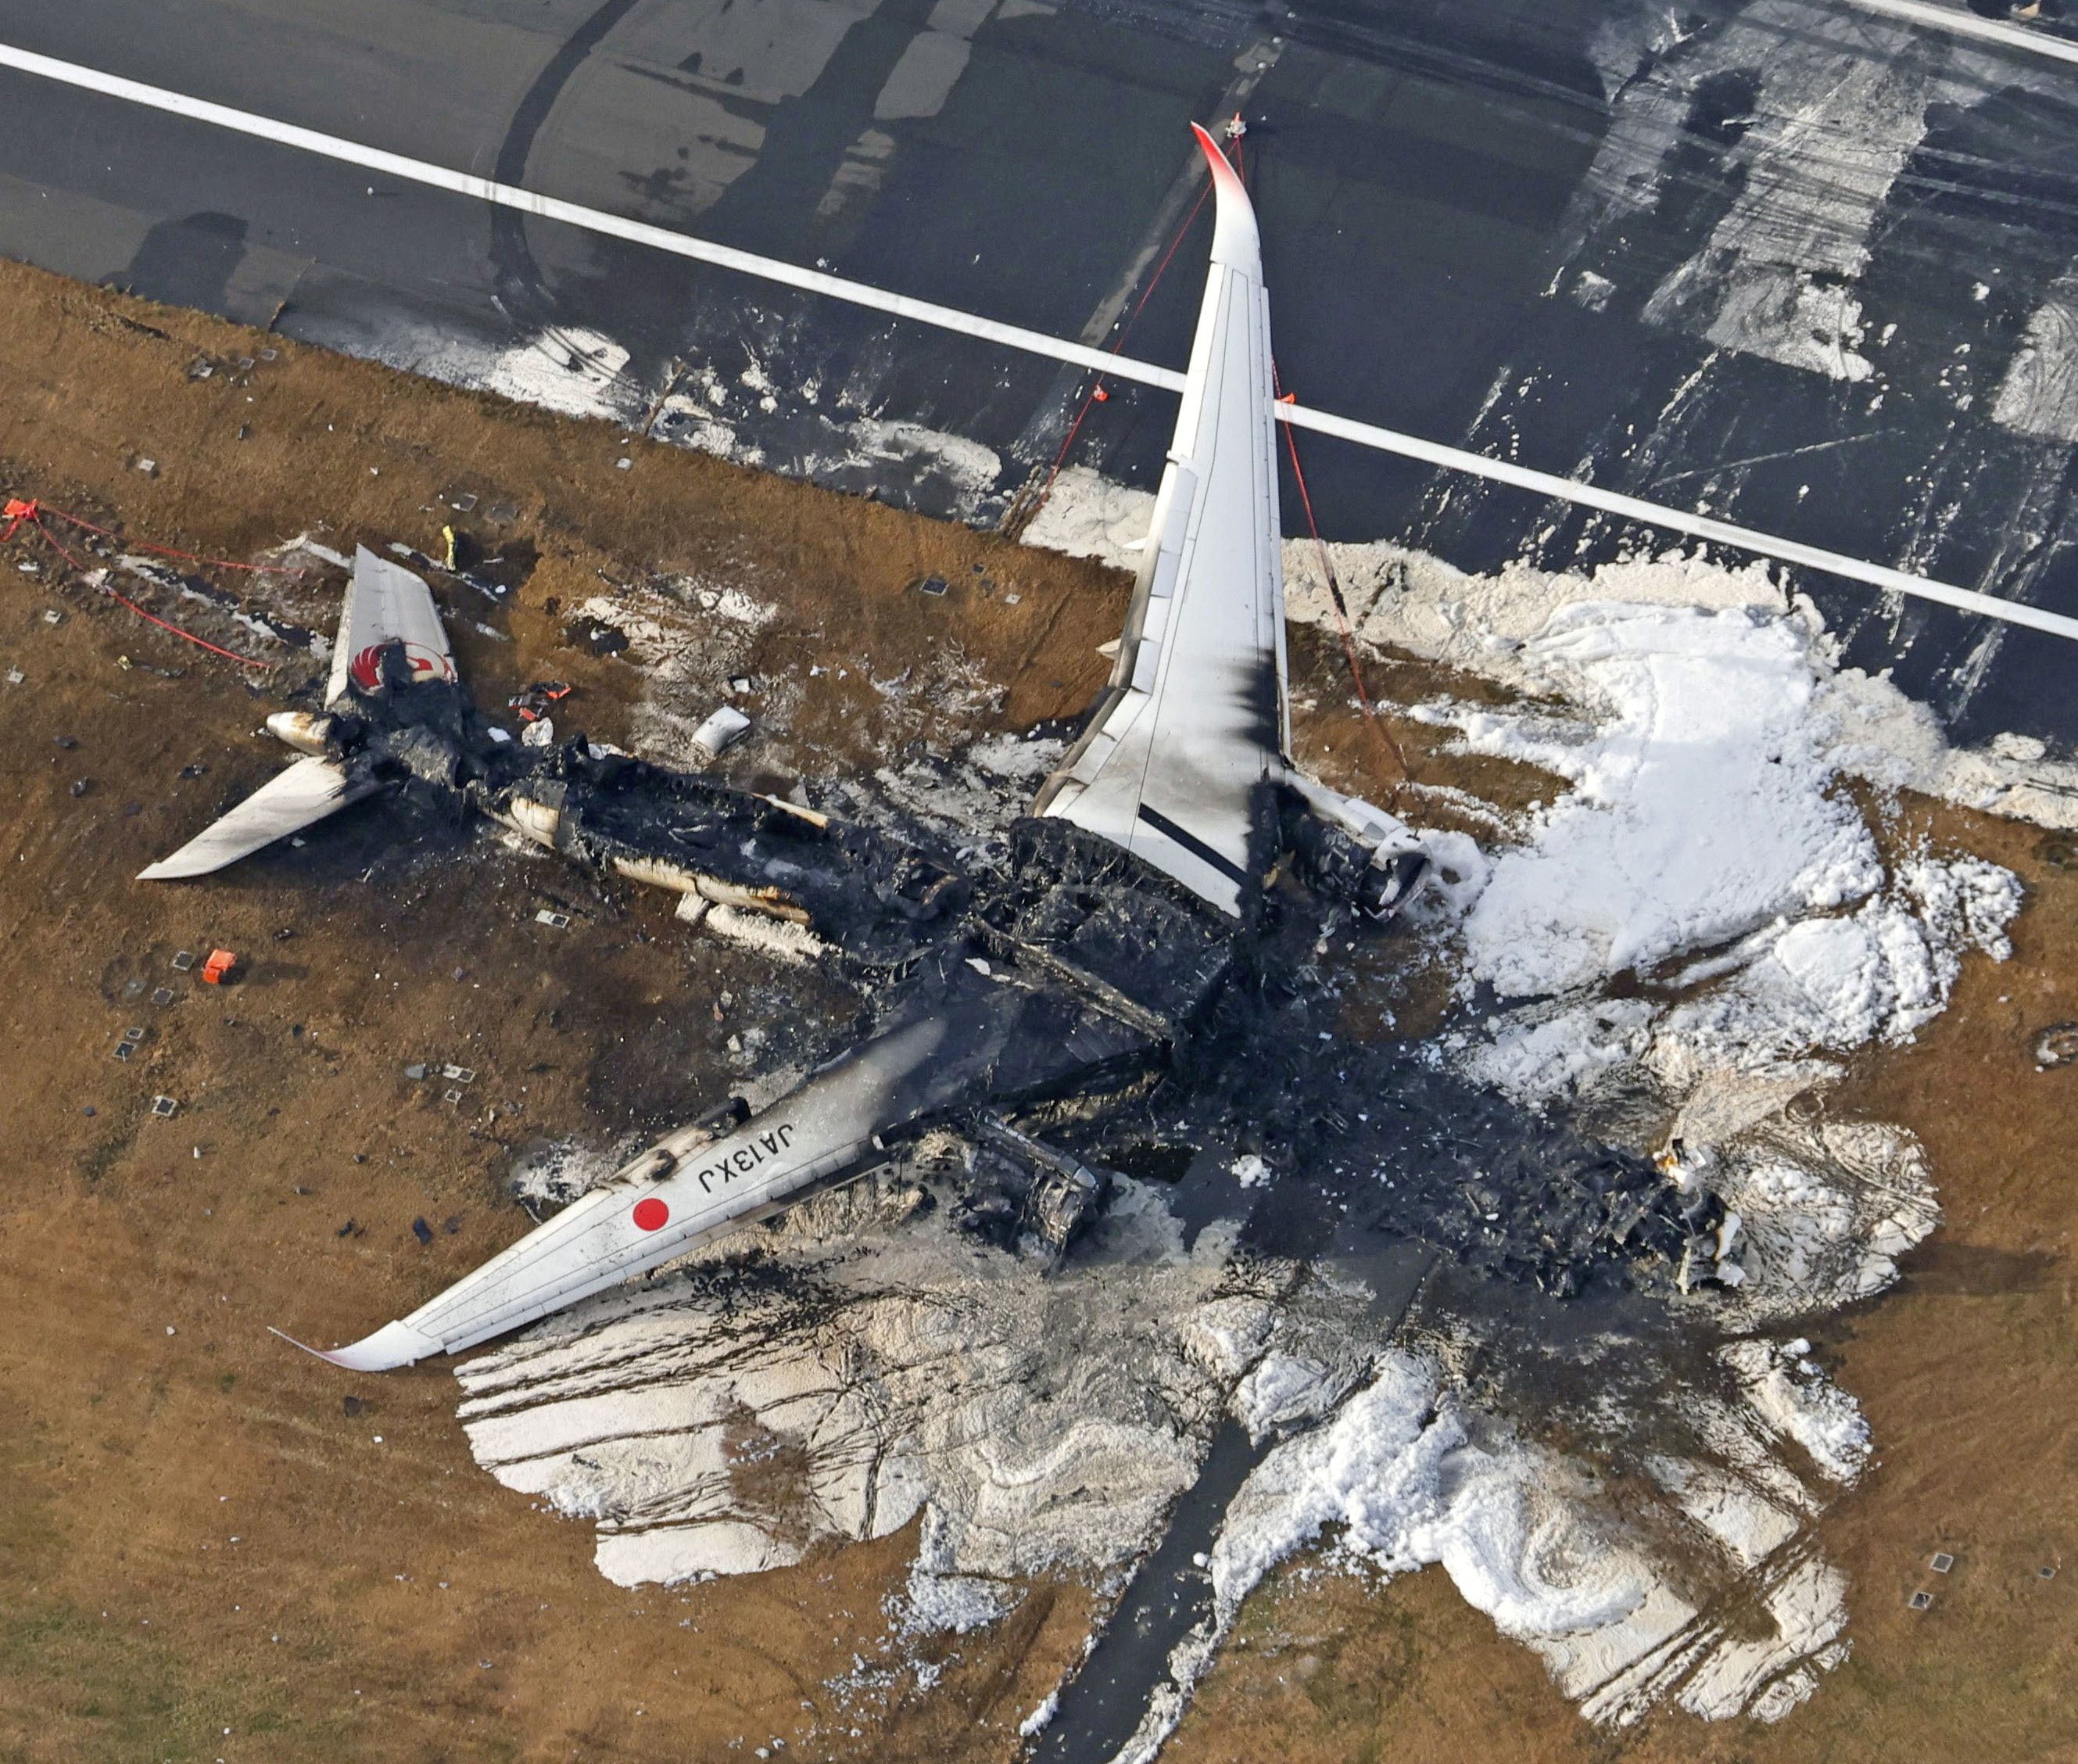 The burnt Japan Airlines plane after a collision with a coastguard aircraft at Haneda airport in Tokyo. Photo: Kyodo via Reuters